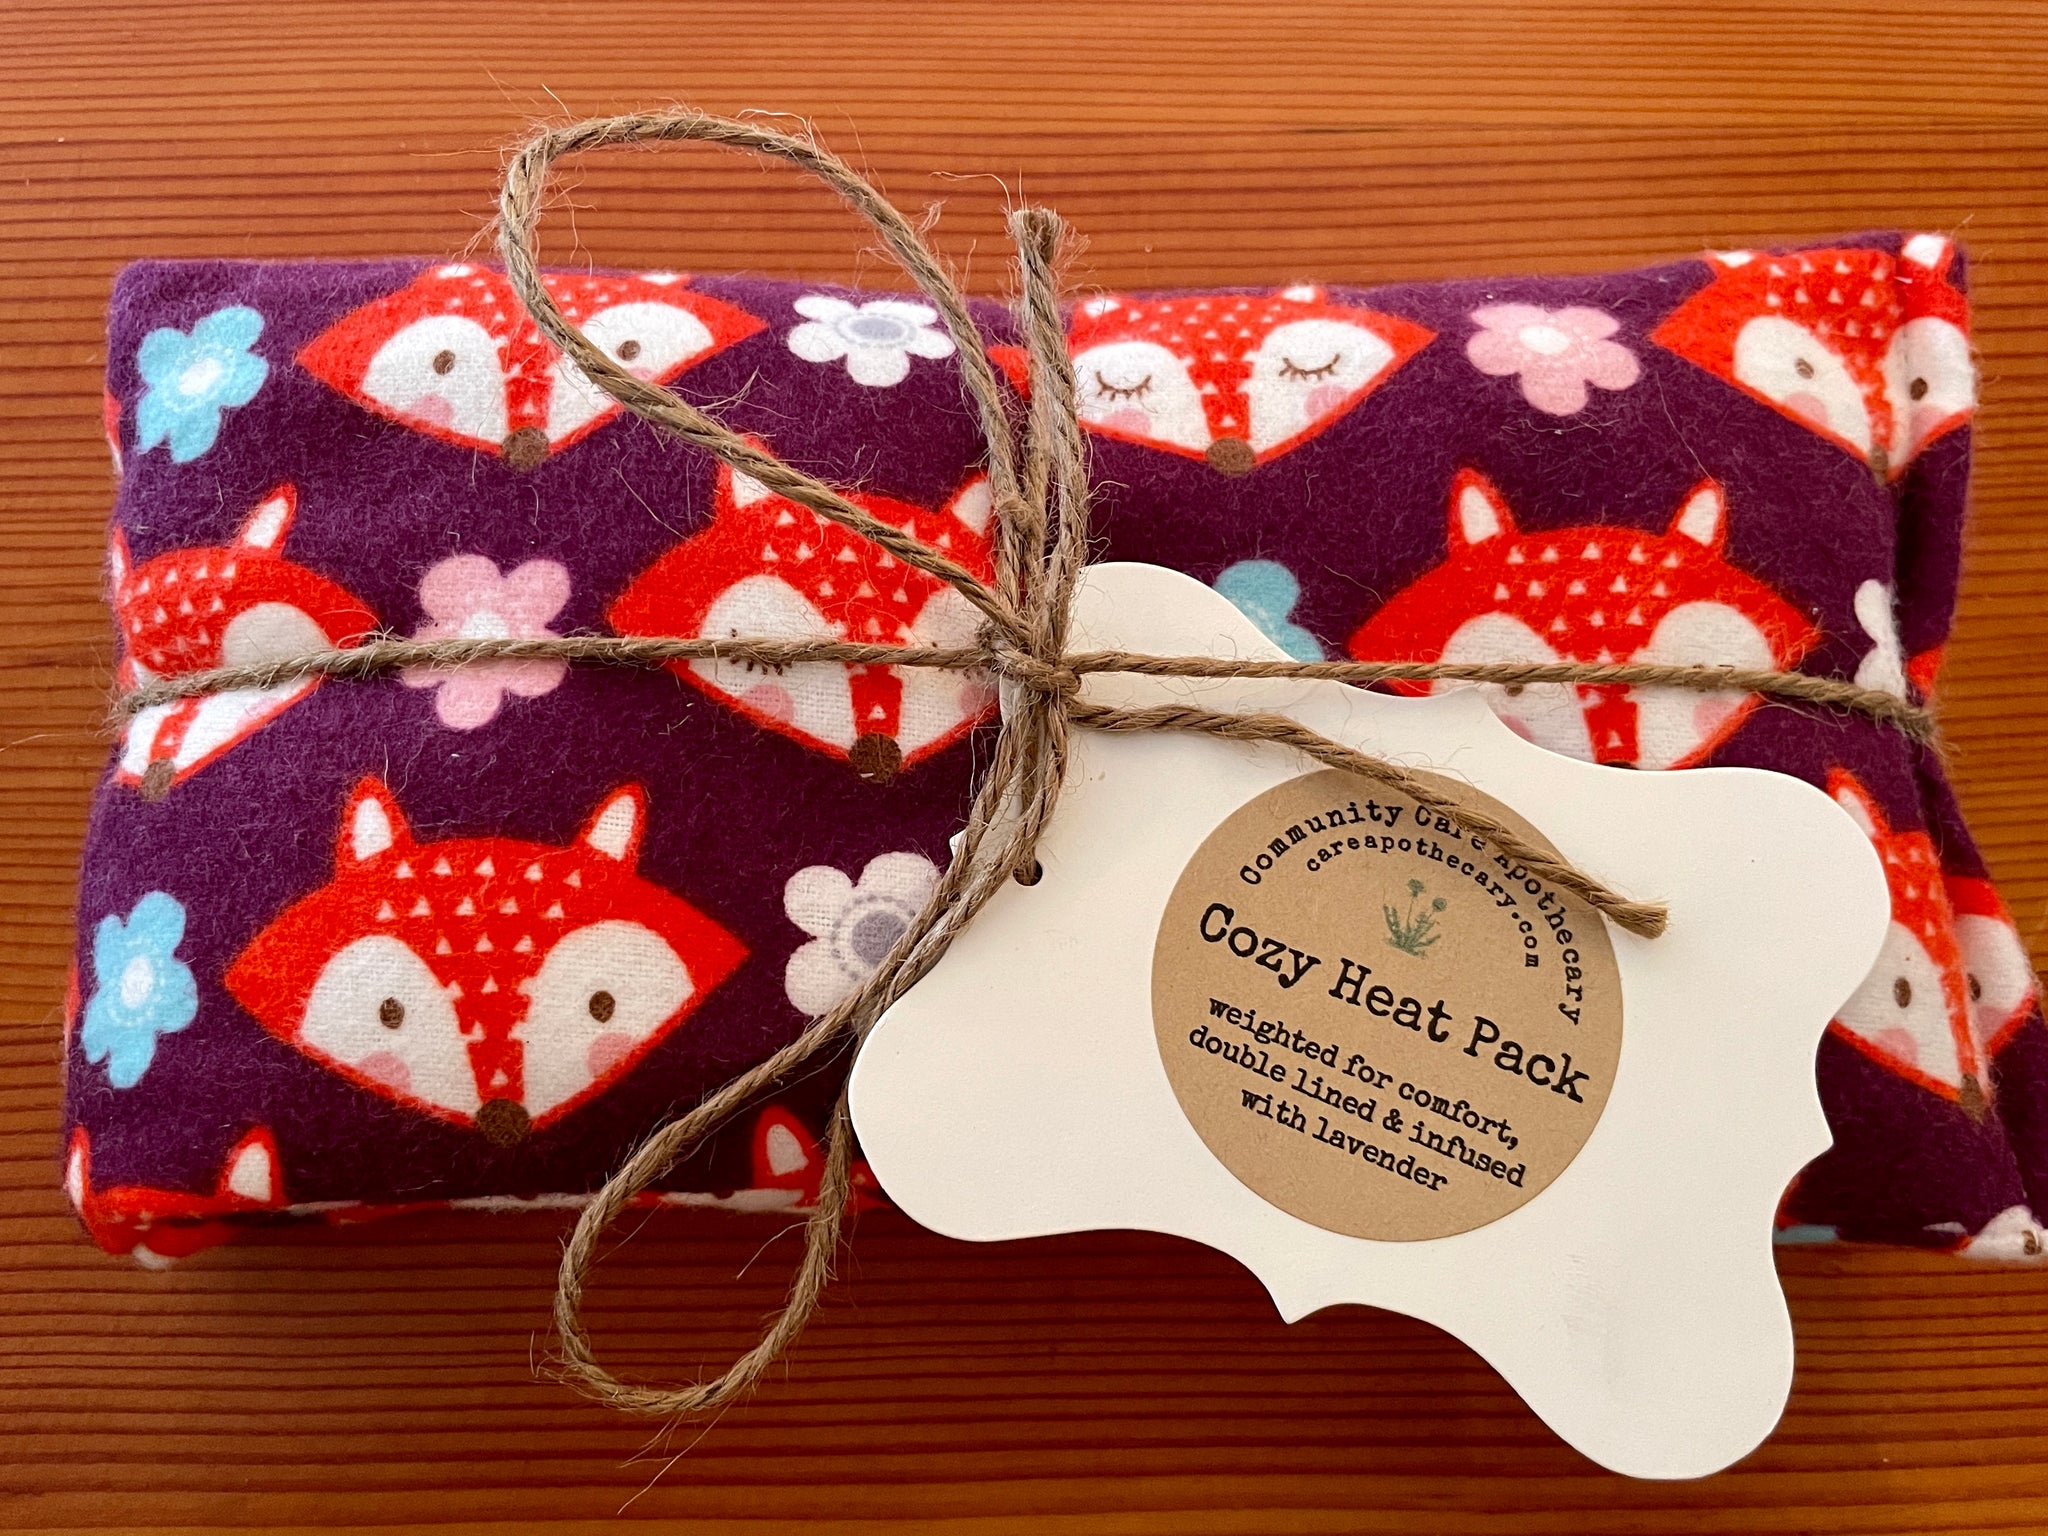 Cozy Heat Pack – Community Care Apothecary